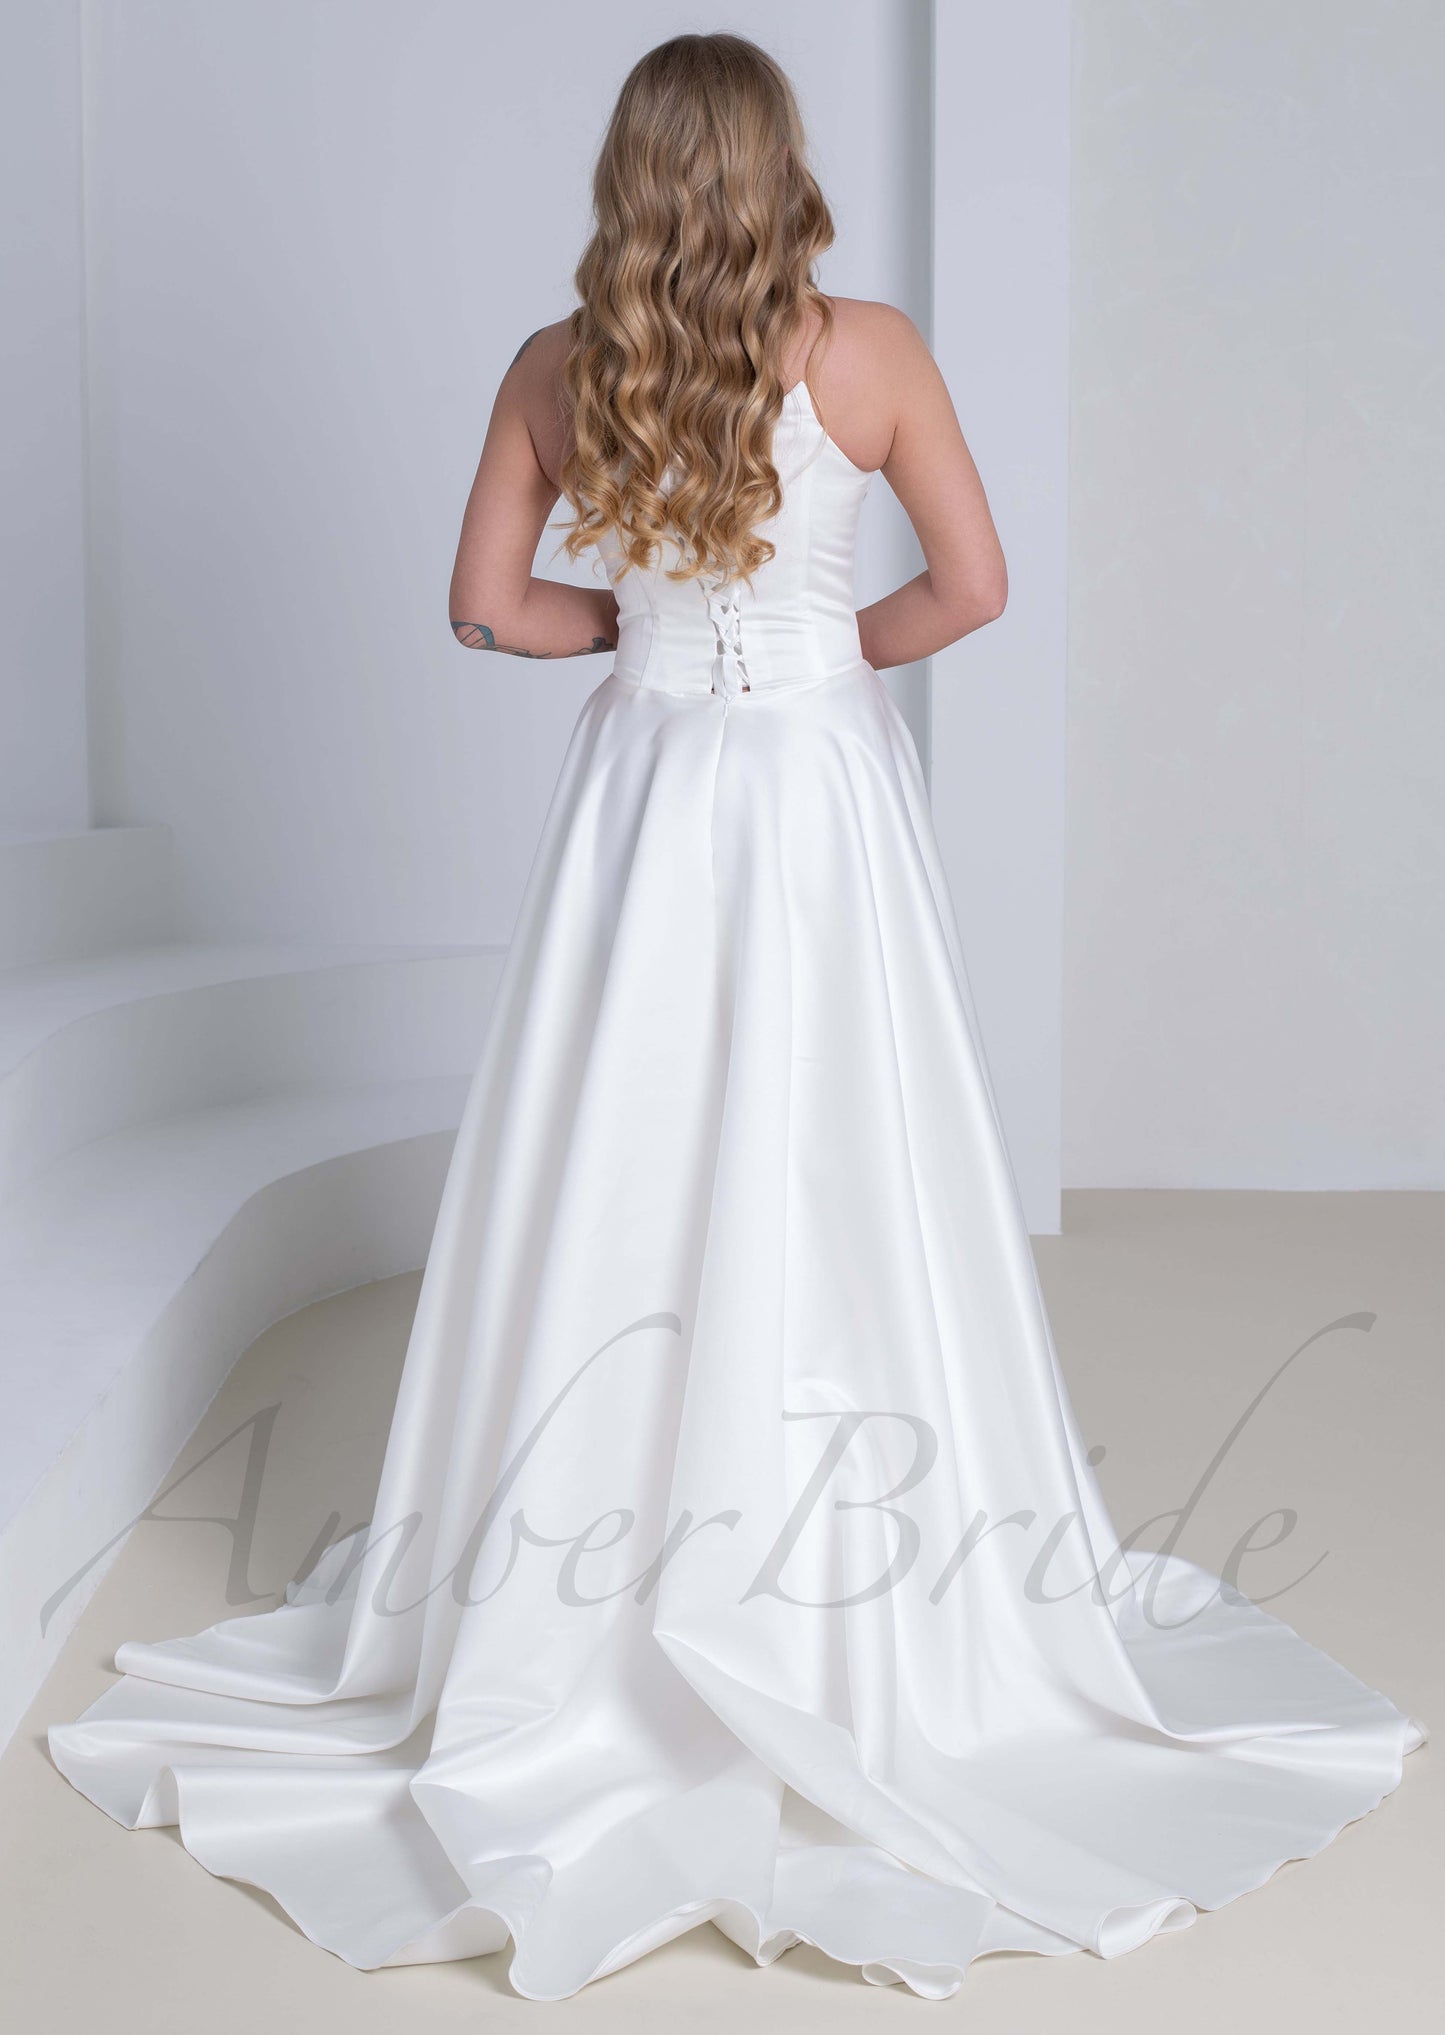 Exquisite A Line Satin Wedding Dress with Strapless Bodice